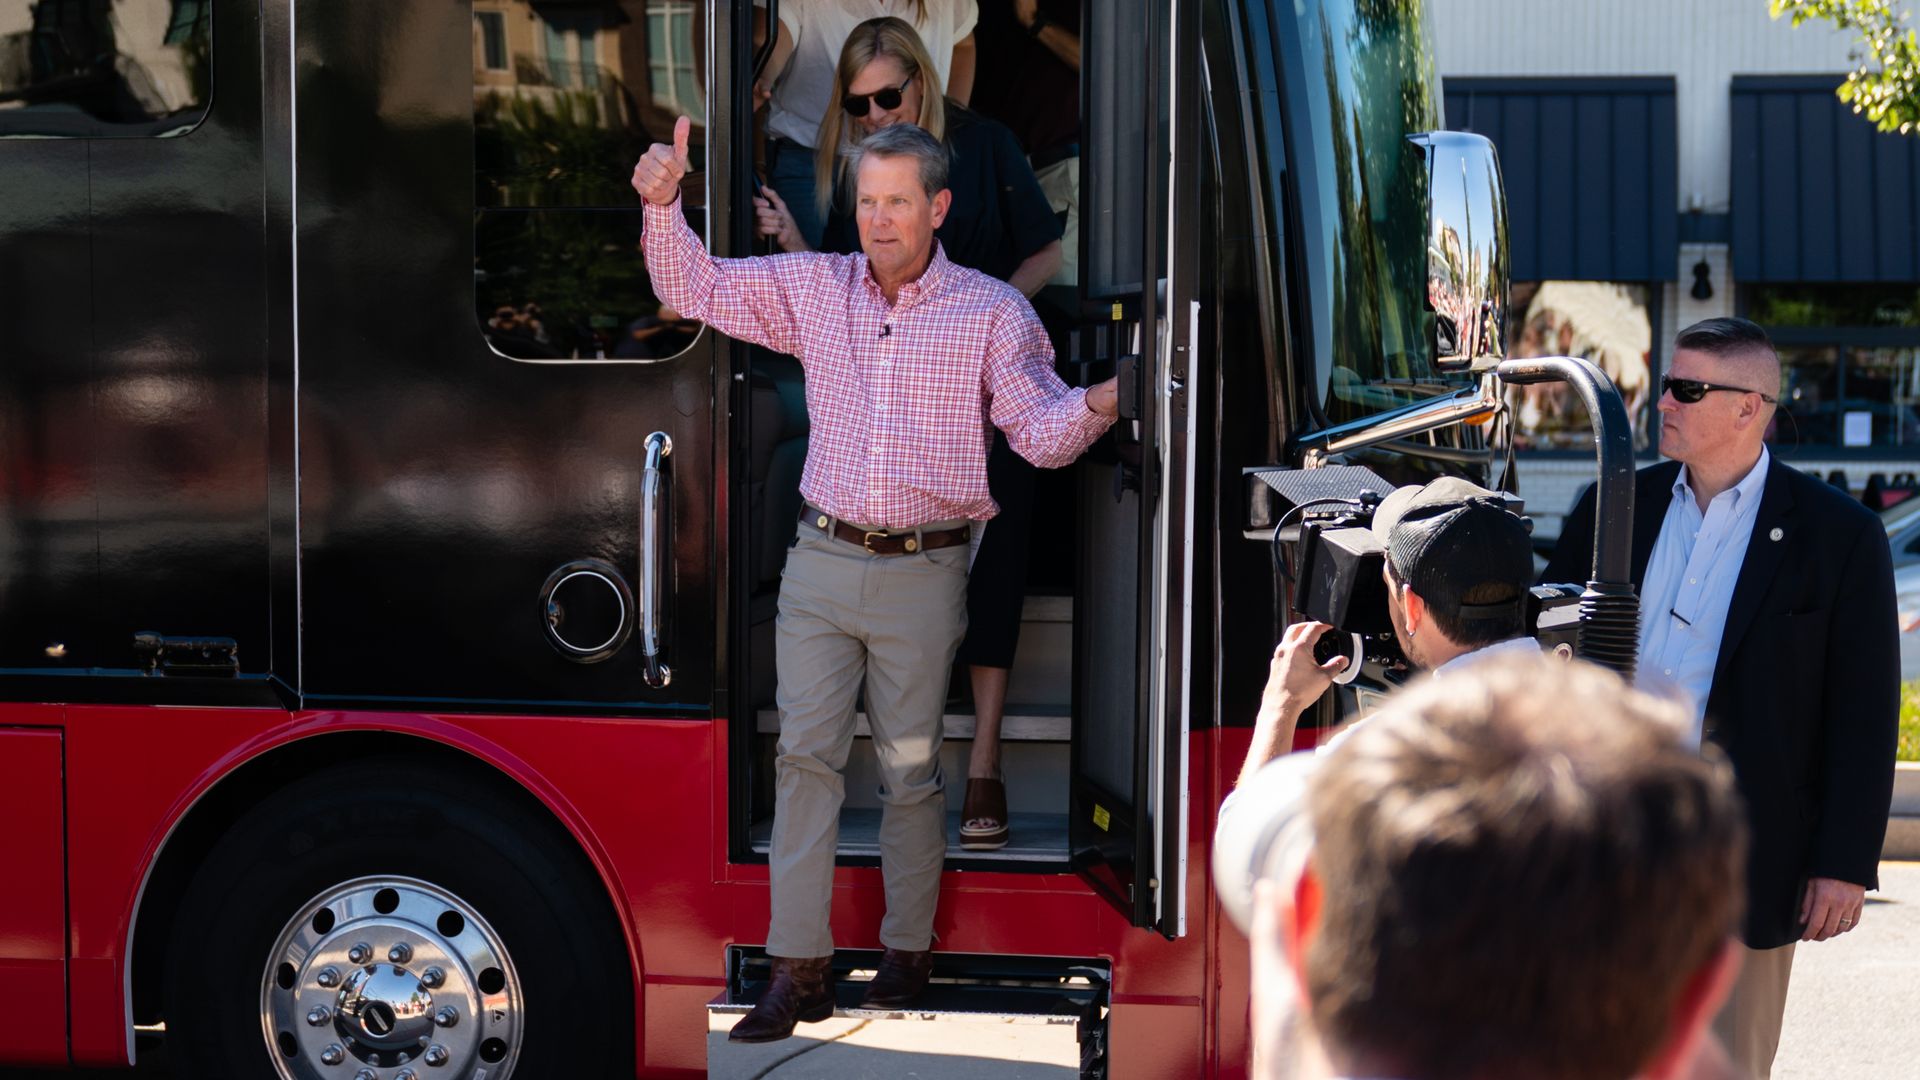 Brian Kemp gives a thumbs up as he steps out of a campaign bus